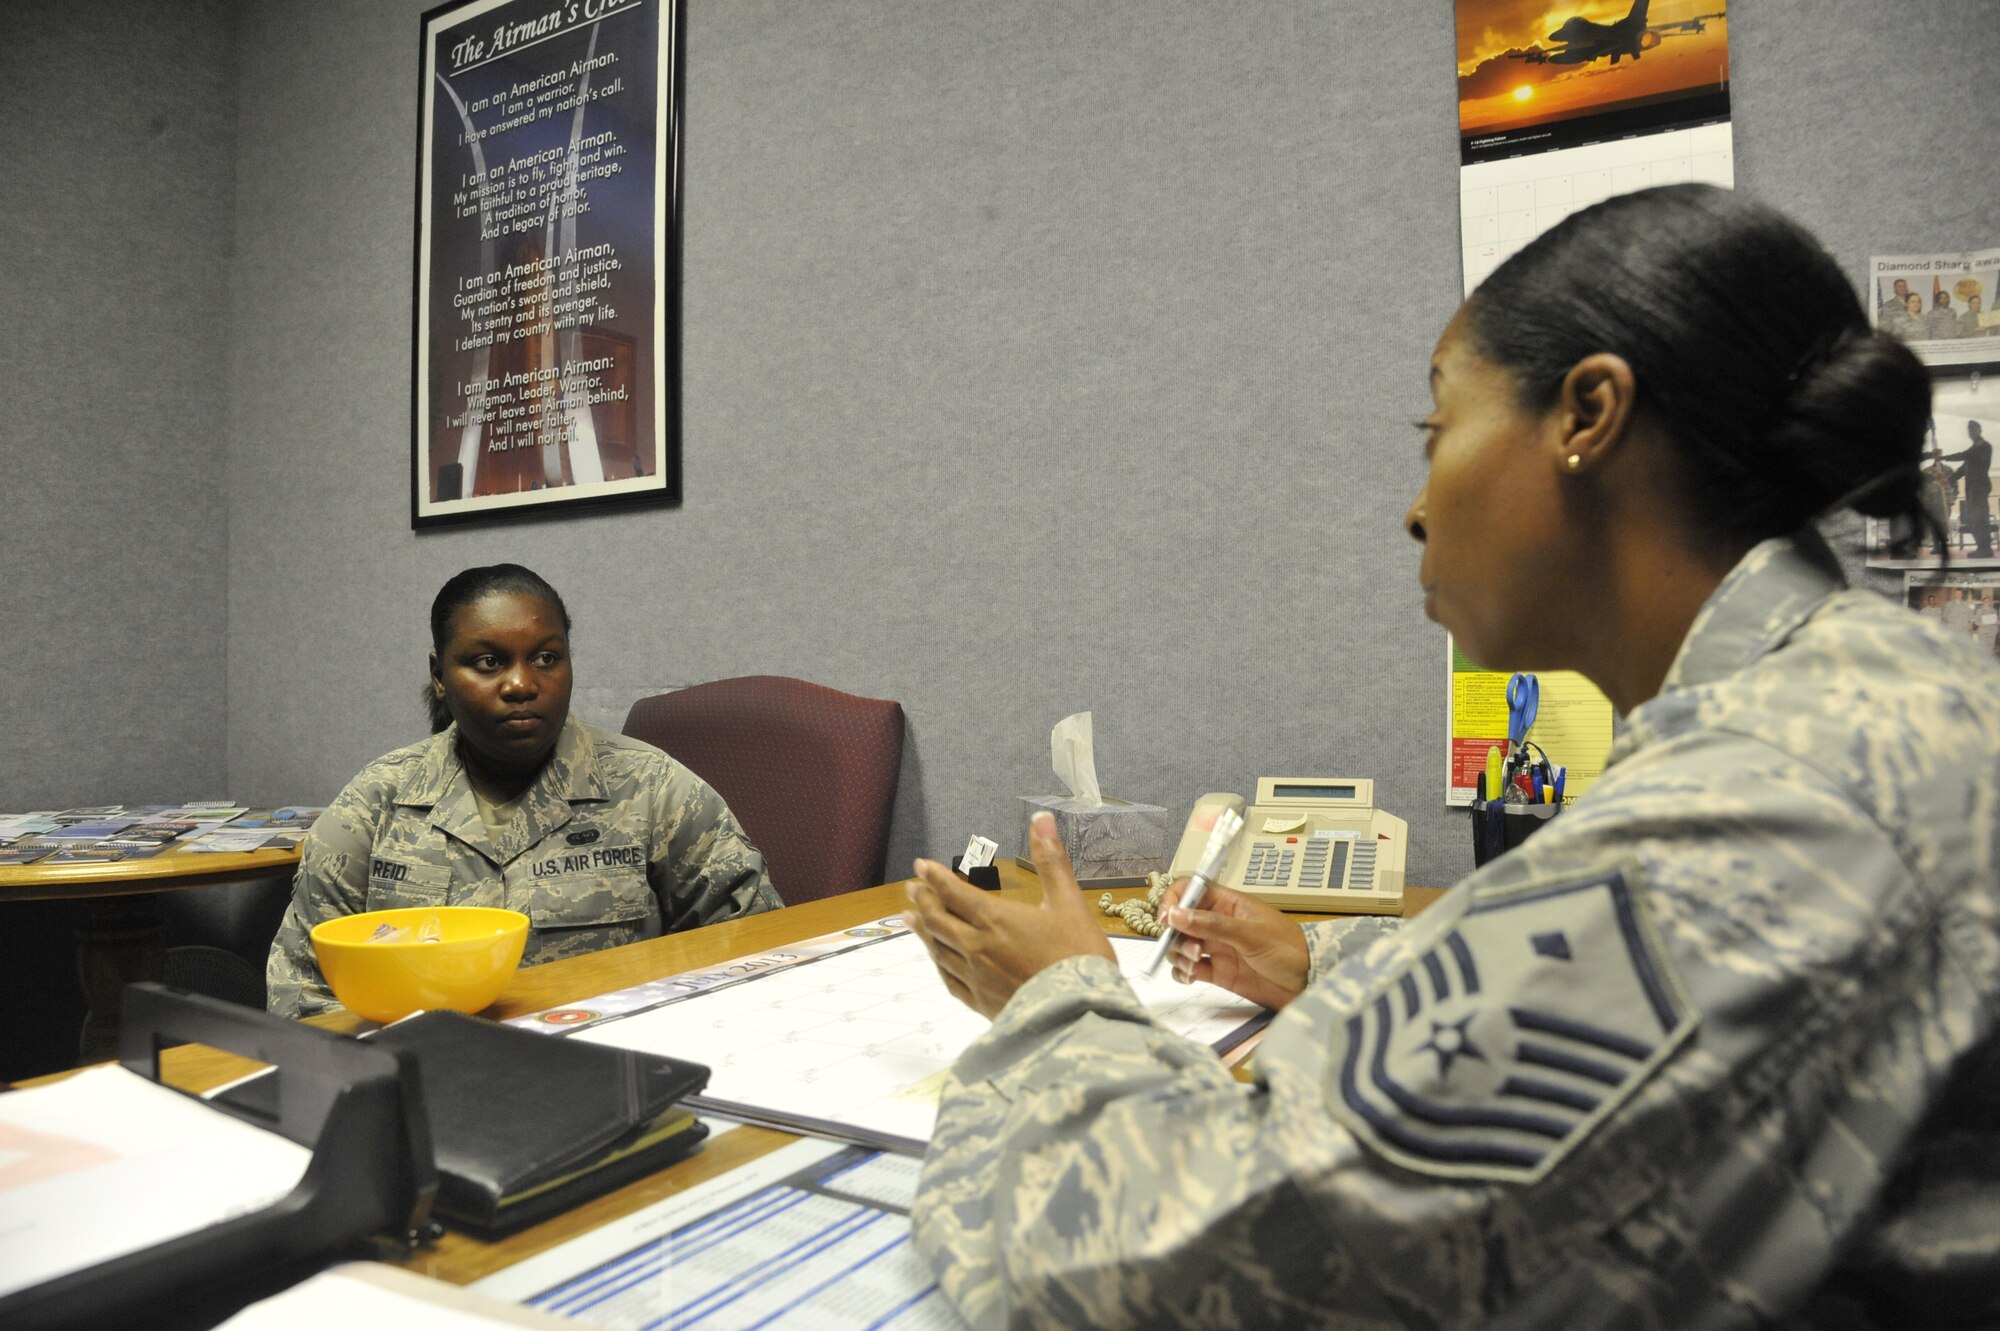 Master Sgt. Lafoundra Thompson, 509th Operations Group first sergeant, assists Airman 1st Class Tamila Reid, 509th Operation Support Squadron combat crew communications apprentice, with a personal situation at Whiteman Air Force Base, Mo., July 23, 2013. First sergeants play a key role in helping their Airmen with any situation that is brought to their attention. They also strive to encourage Airmen and keep the Whiteman mission rolling. (U.S. Air Force photo by Airman 1st Class Keenan Berry/Released)